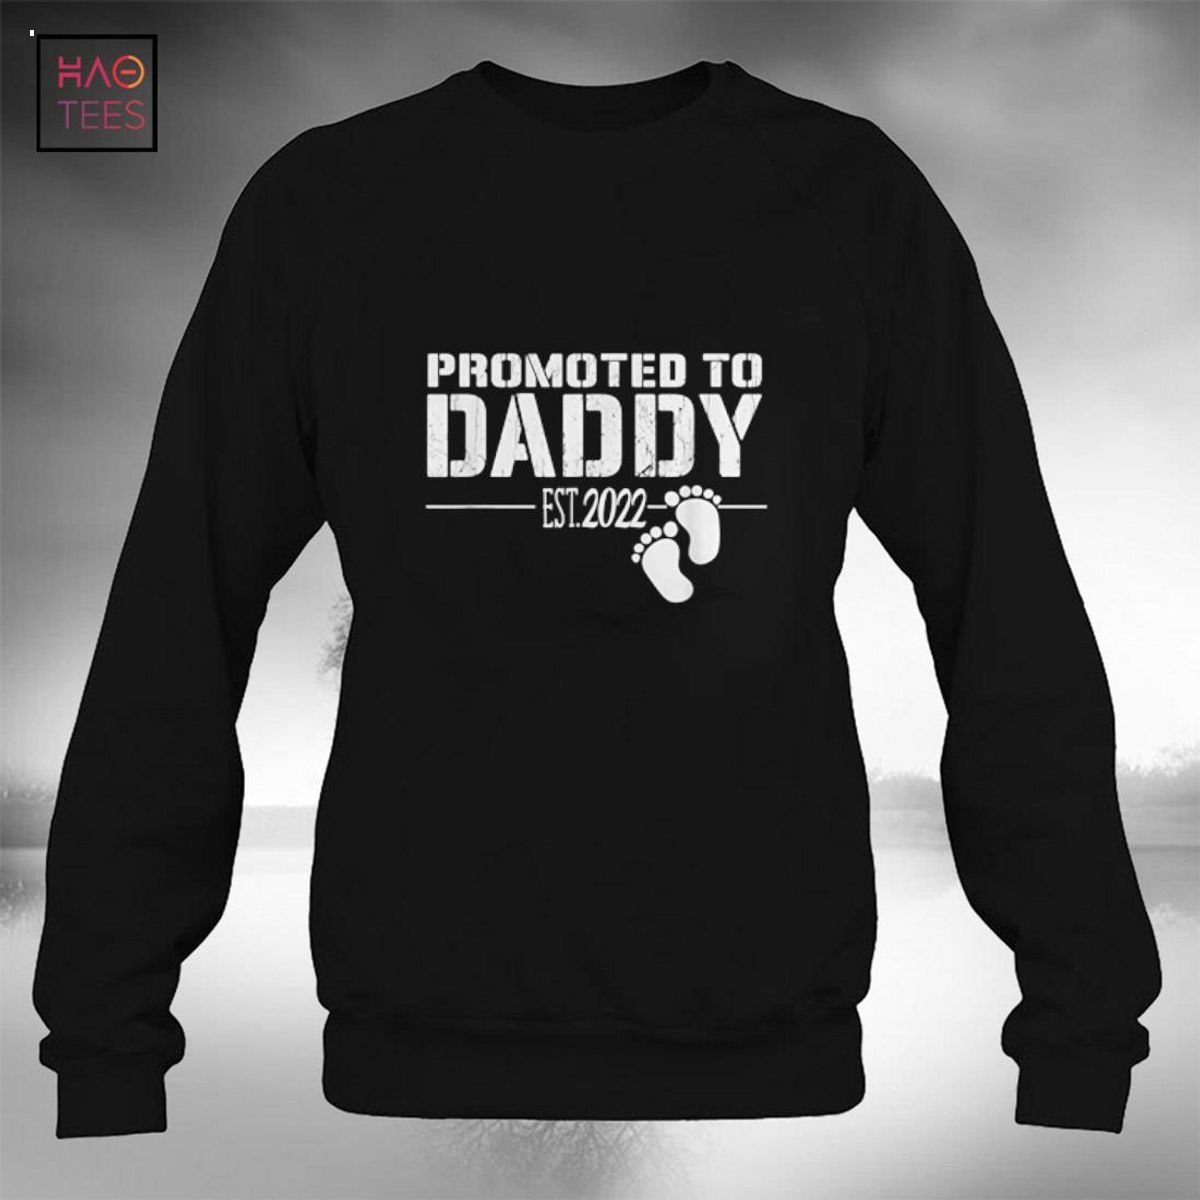 Soon To Be Dad Shirt Promoted to Daddy New Dad Father T-Shirt Gift Fathers Day Gift Soon to be Dad Gift T-Shirt Promoted To Daddy